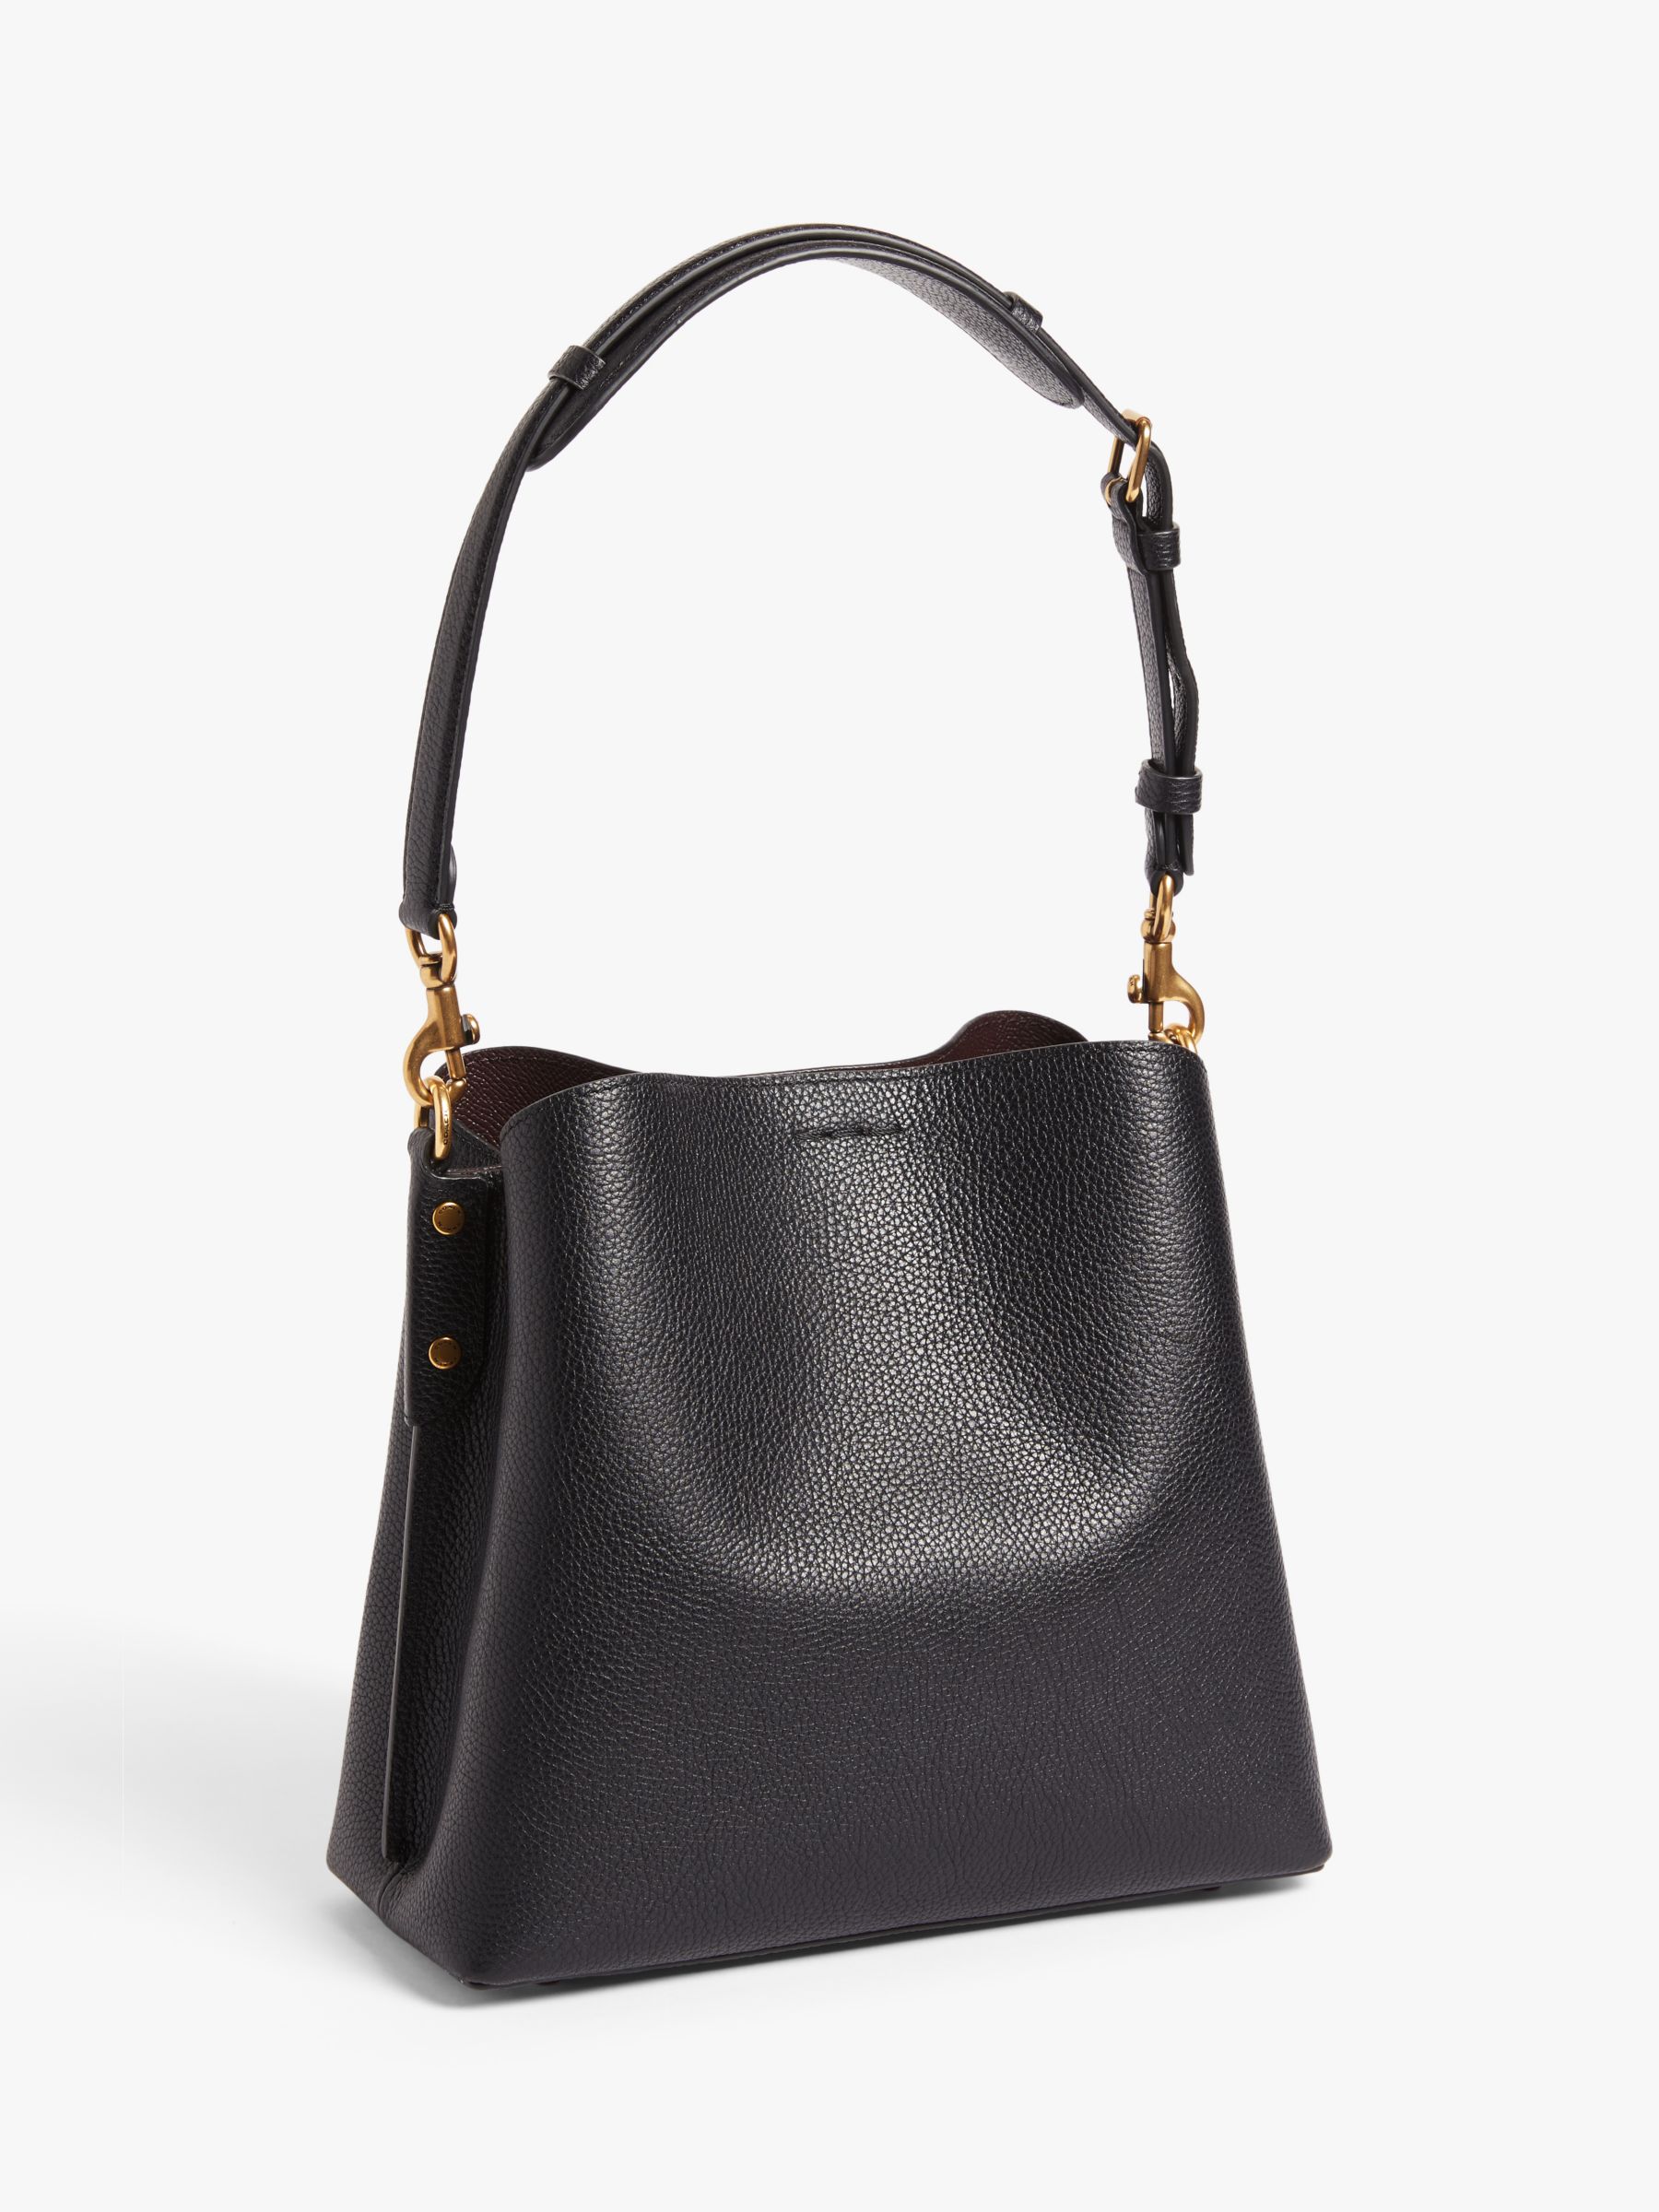 Coach Willow Leather Bucket Bag, Black at John Lewis & Partners